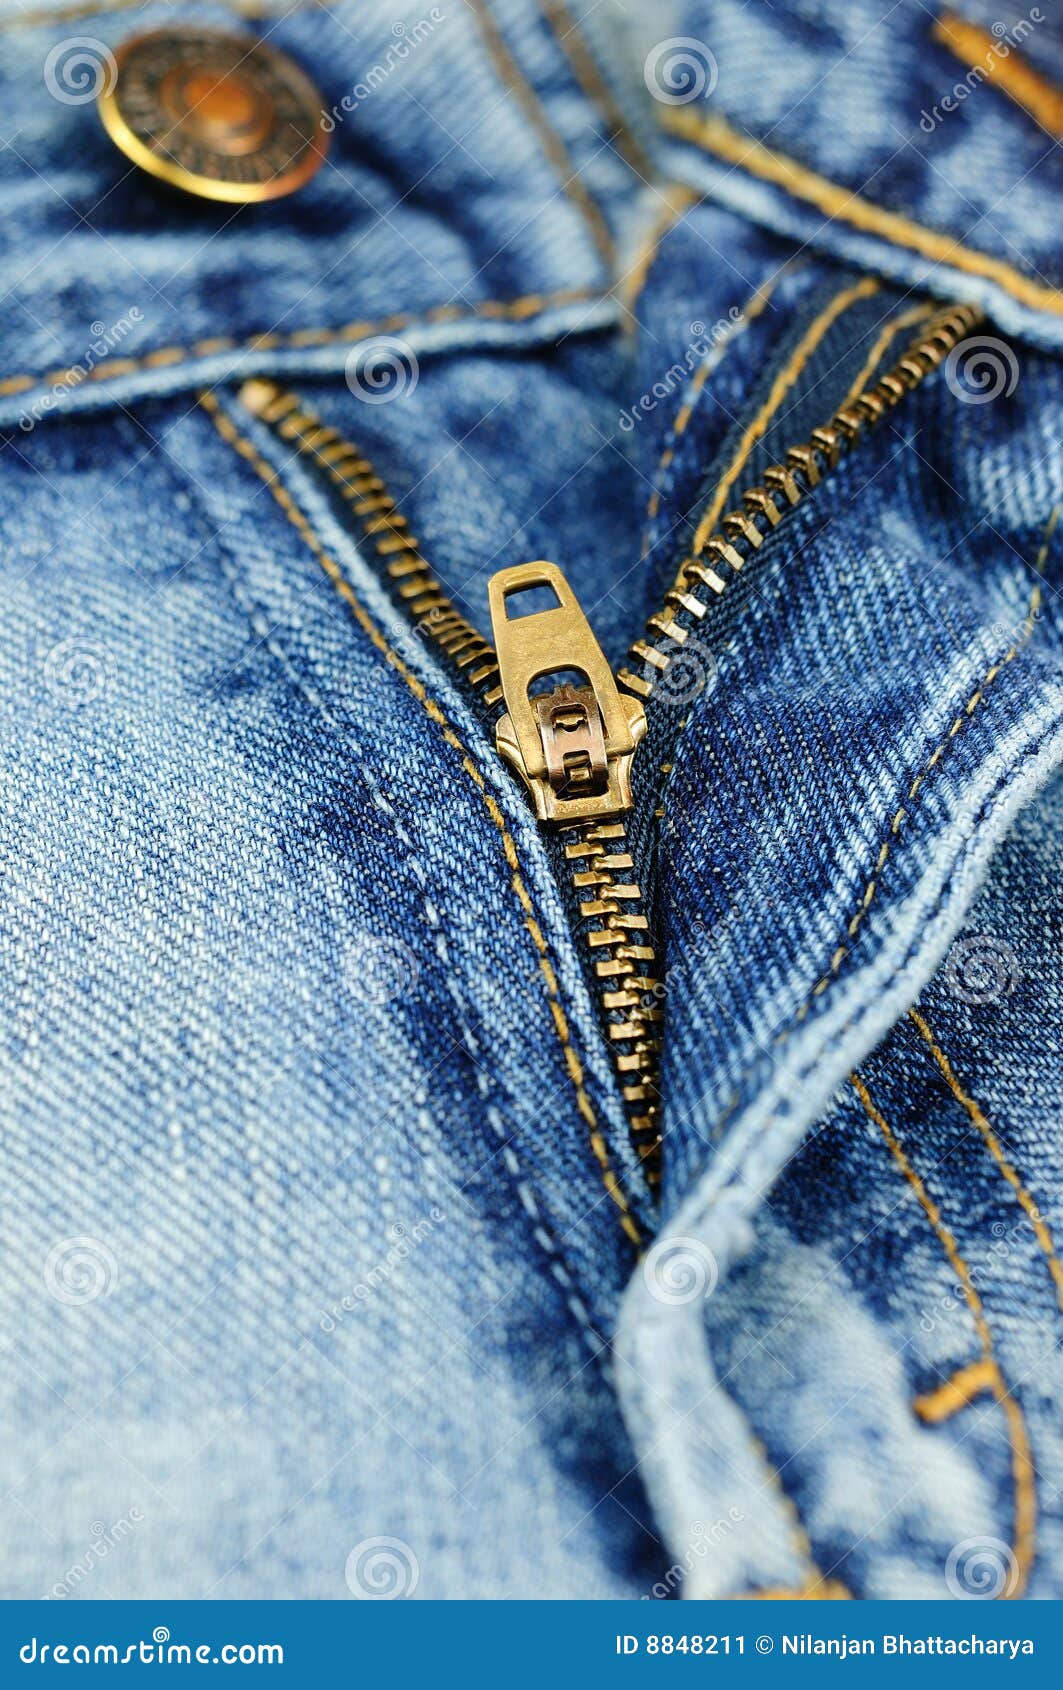 Zipper of a Fashionable Pair of Jeans Stock Image - Image of color ...